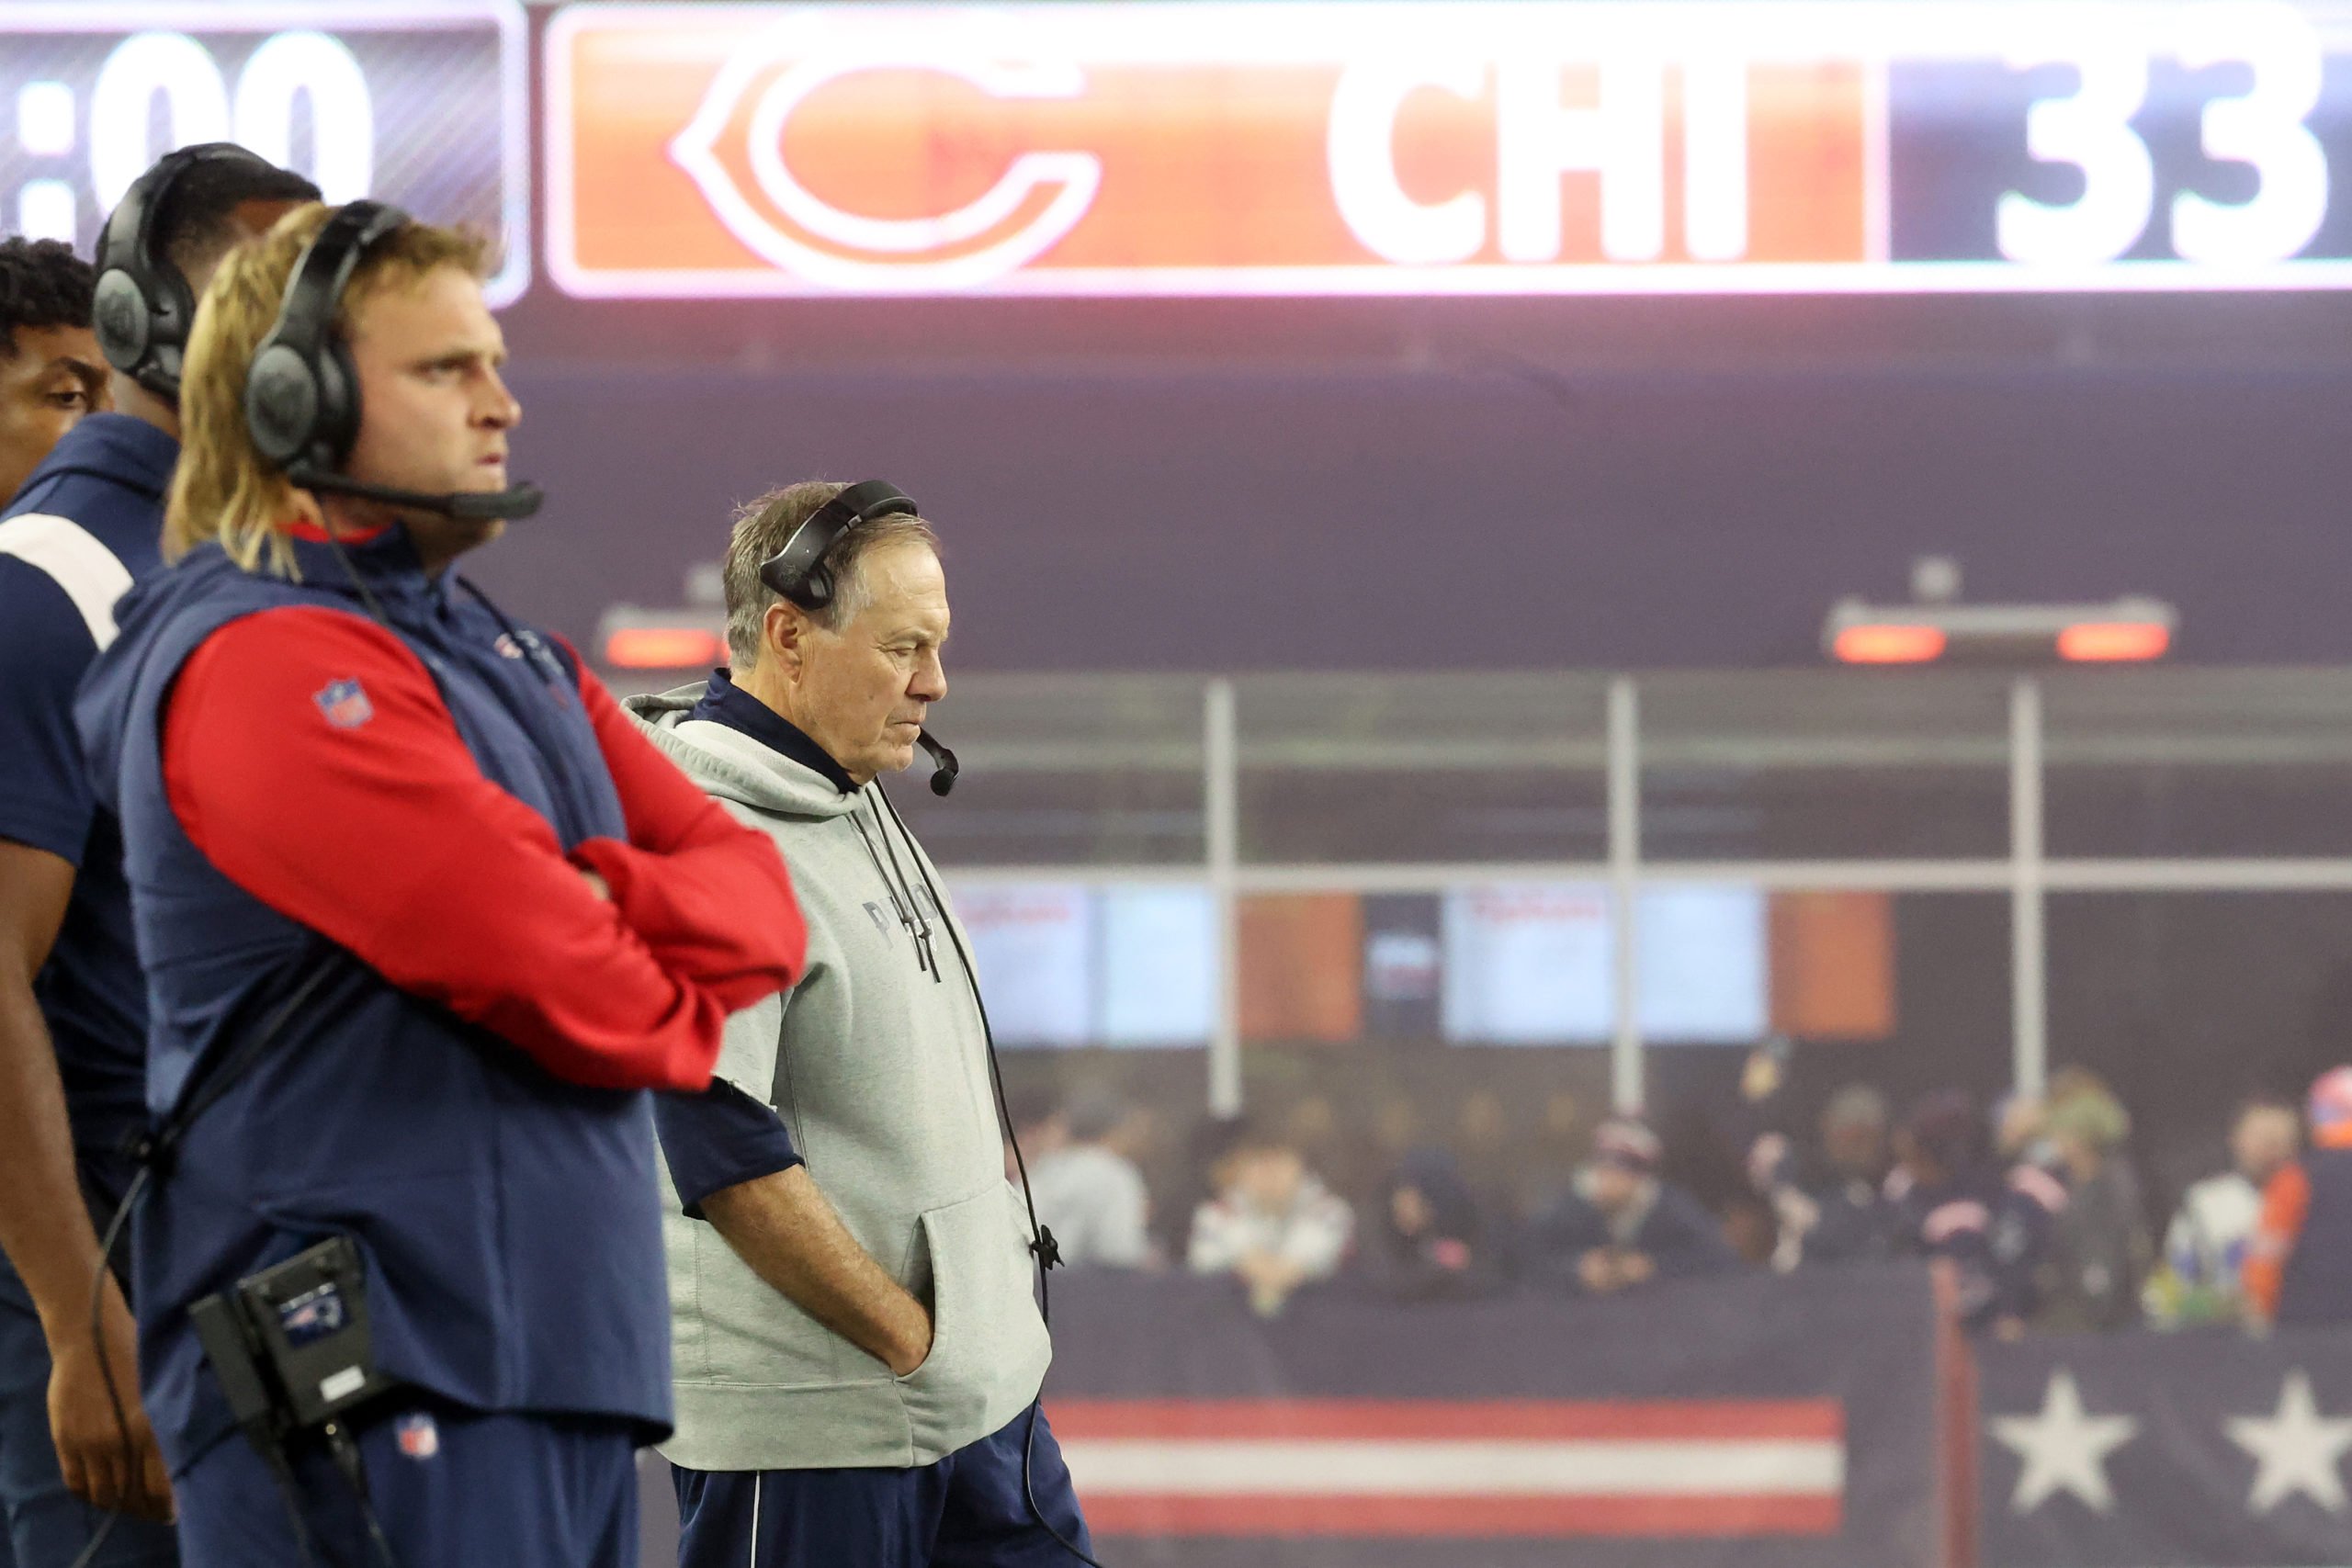 FOXBOROUGH, MASSACHUSETTS - OCTOBER 24: Outside linebackers coach Stephen Belichick and head coach Bill Belichick of the New England Patriots stand on the sideline during the fourth quarter against the Chicago Bears at Gillette Stadium on October 24, 2022 in Foxborough, Massachusetts. Maddie Meyer/Getty Images